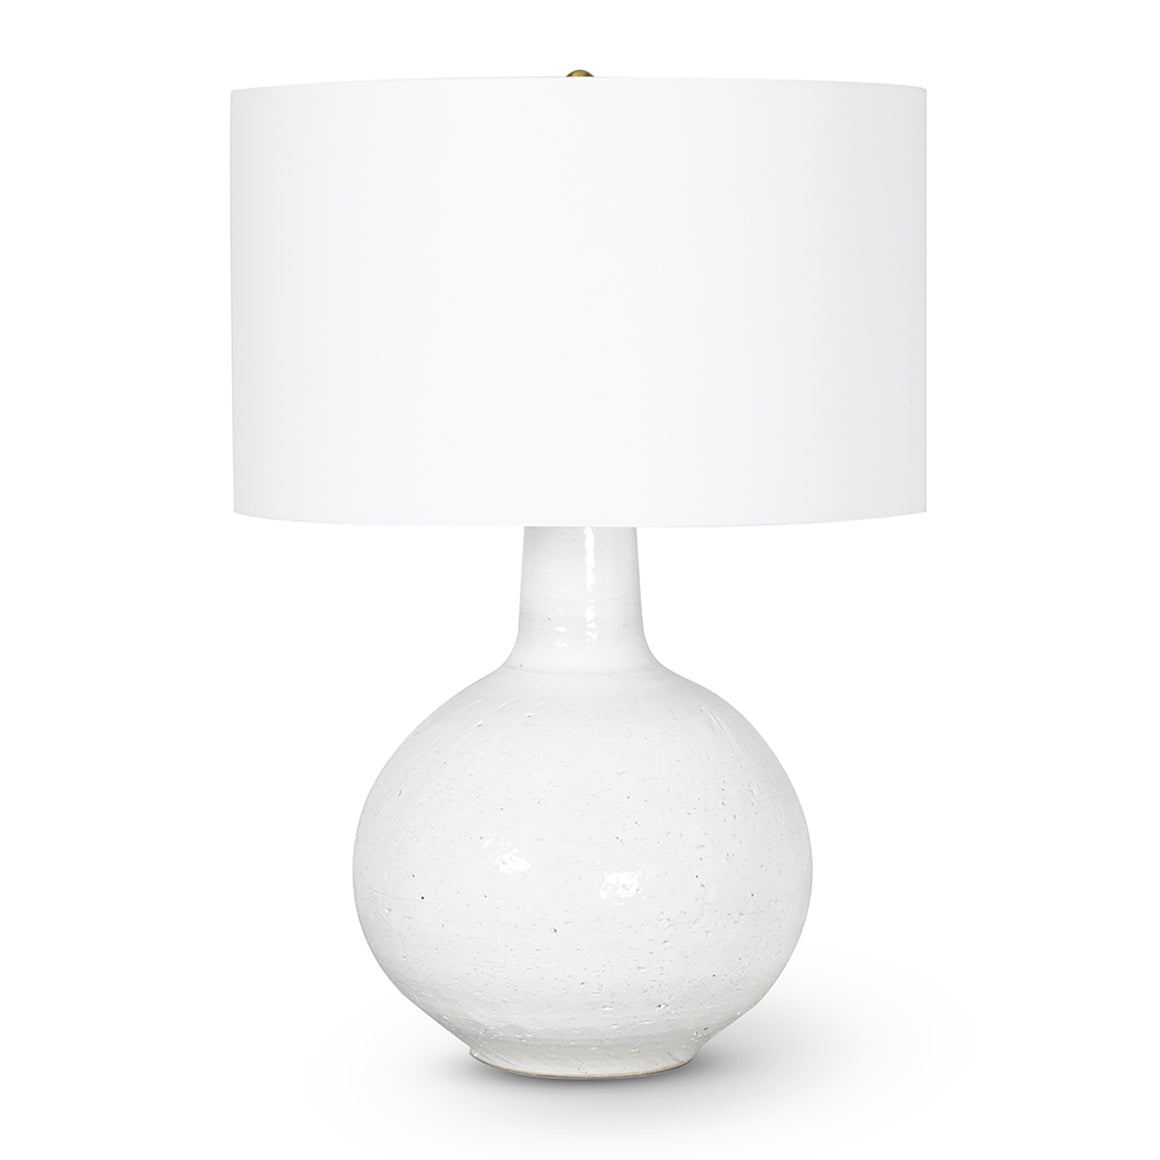 Clemente Ceramic Table Lamp (Earthenware White)